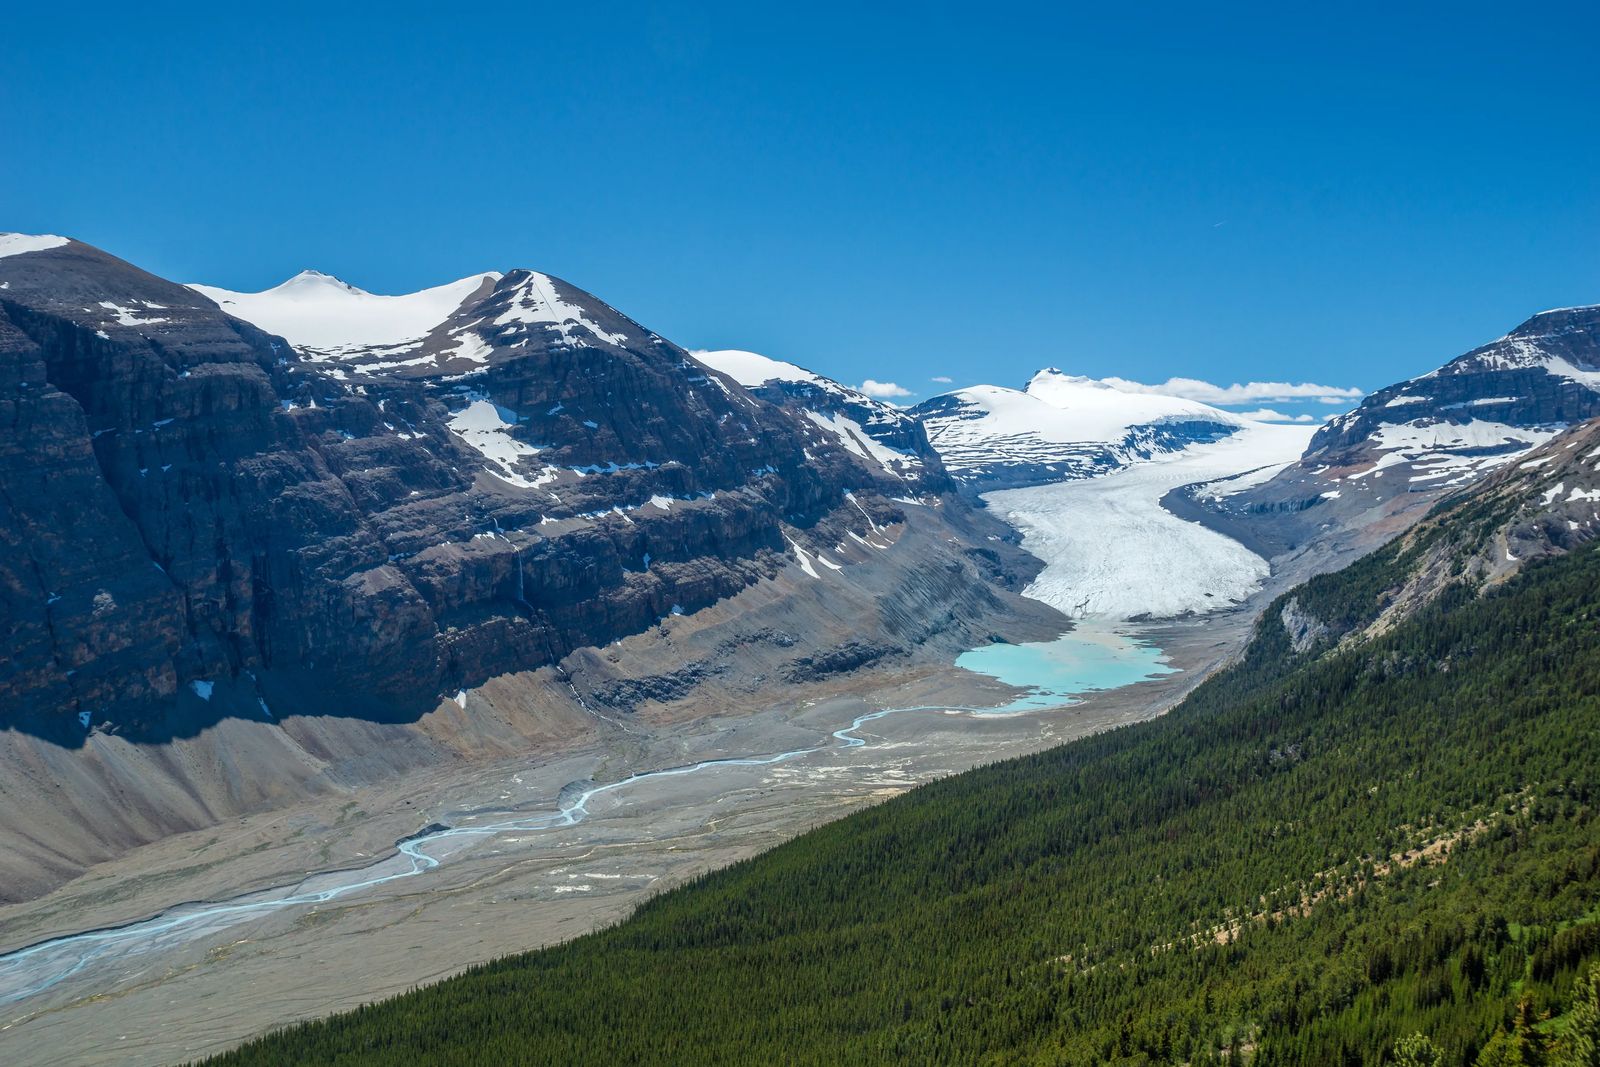 A River of snow and ice in the distance that leads to a blue river, this is Saskatchewan Glacier